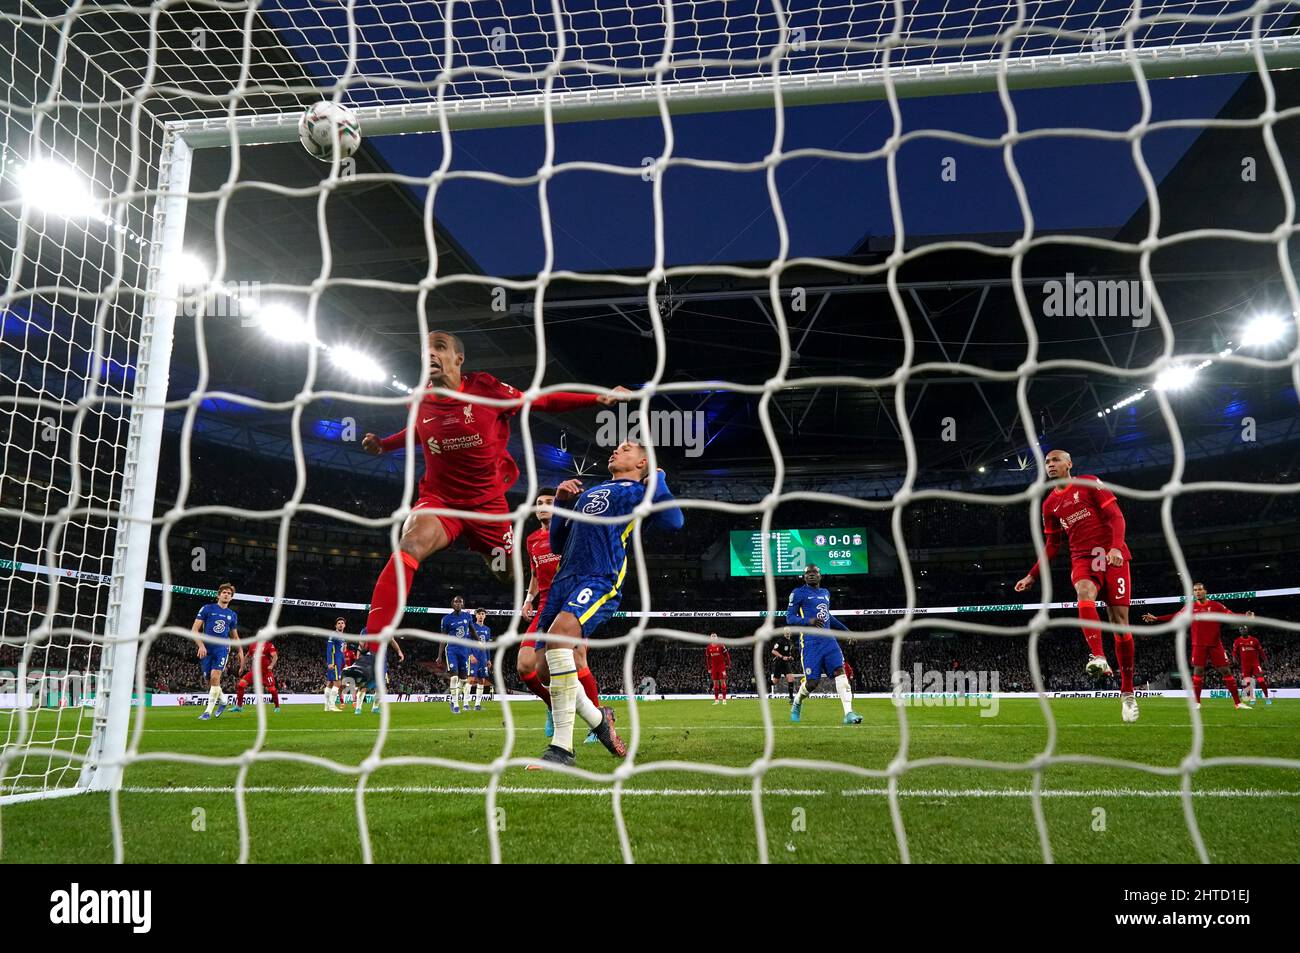 Liverpool's Joel Matip scores a goal before it is later disallowed during the Carabao Cup final at Wembley Stadium, London. Picture date: Sunday 27th February, 2022. Stock Photo